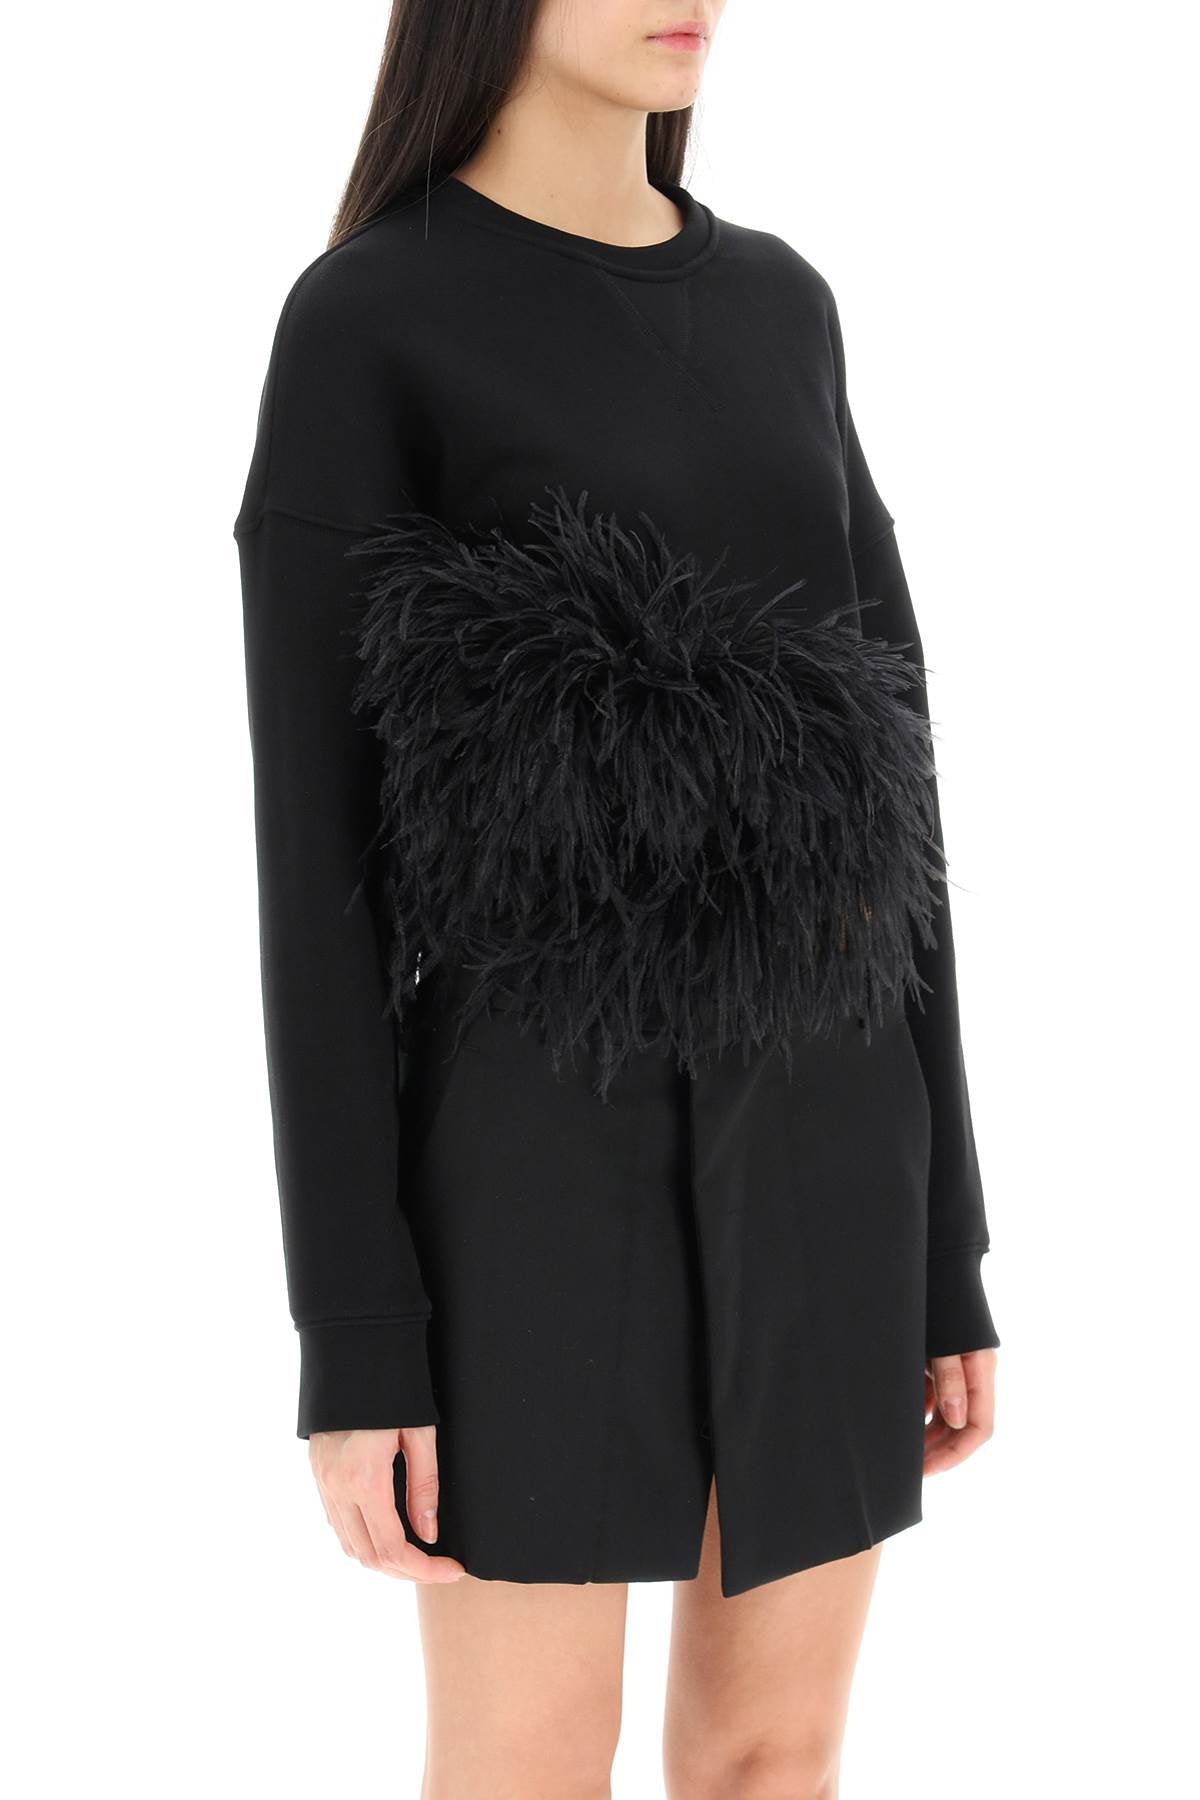 N.21 cropped sweatshirt with feathers-1